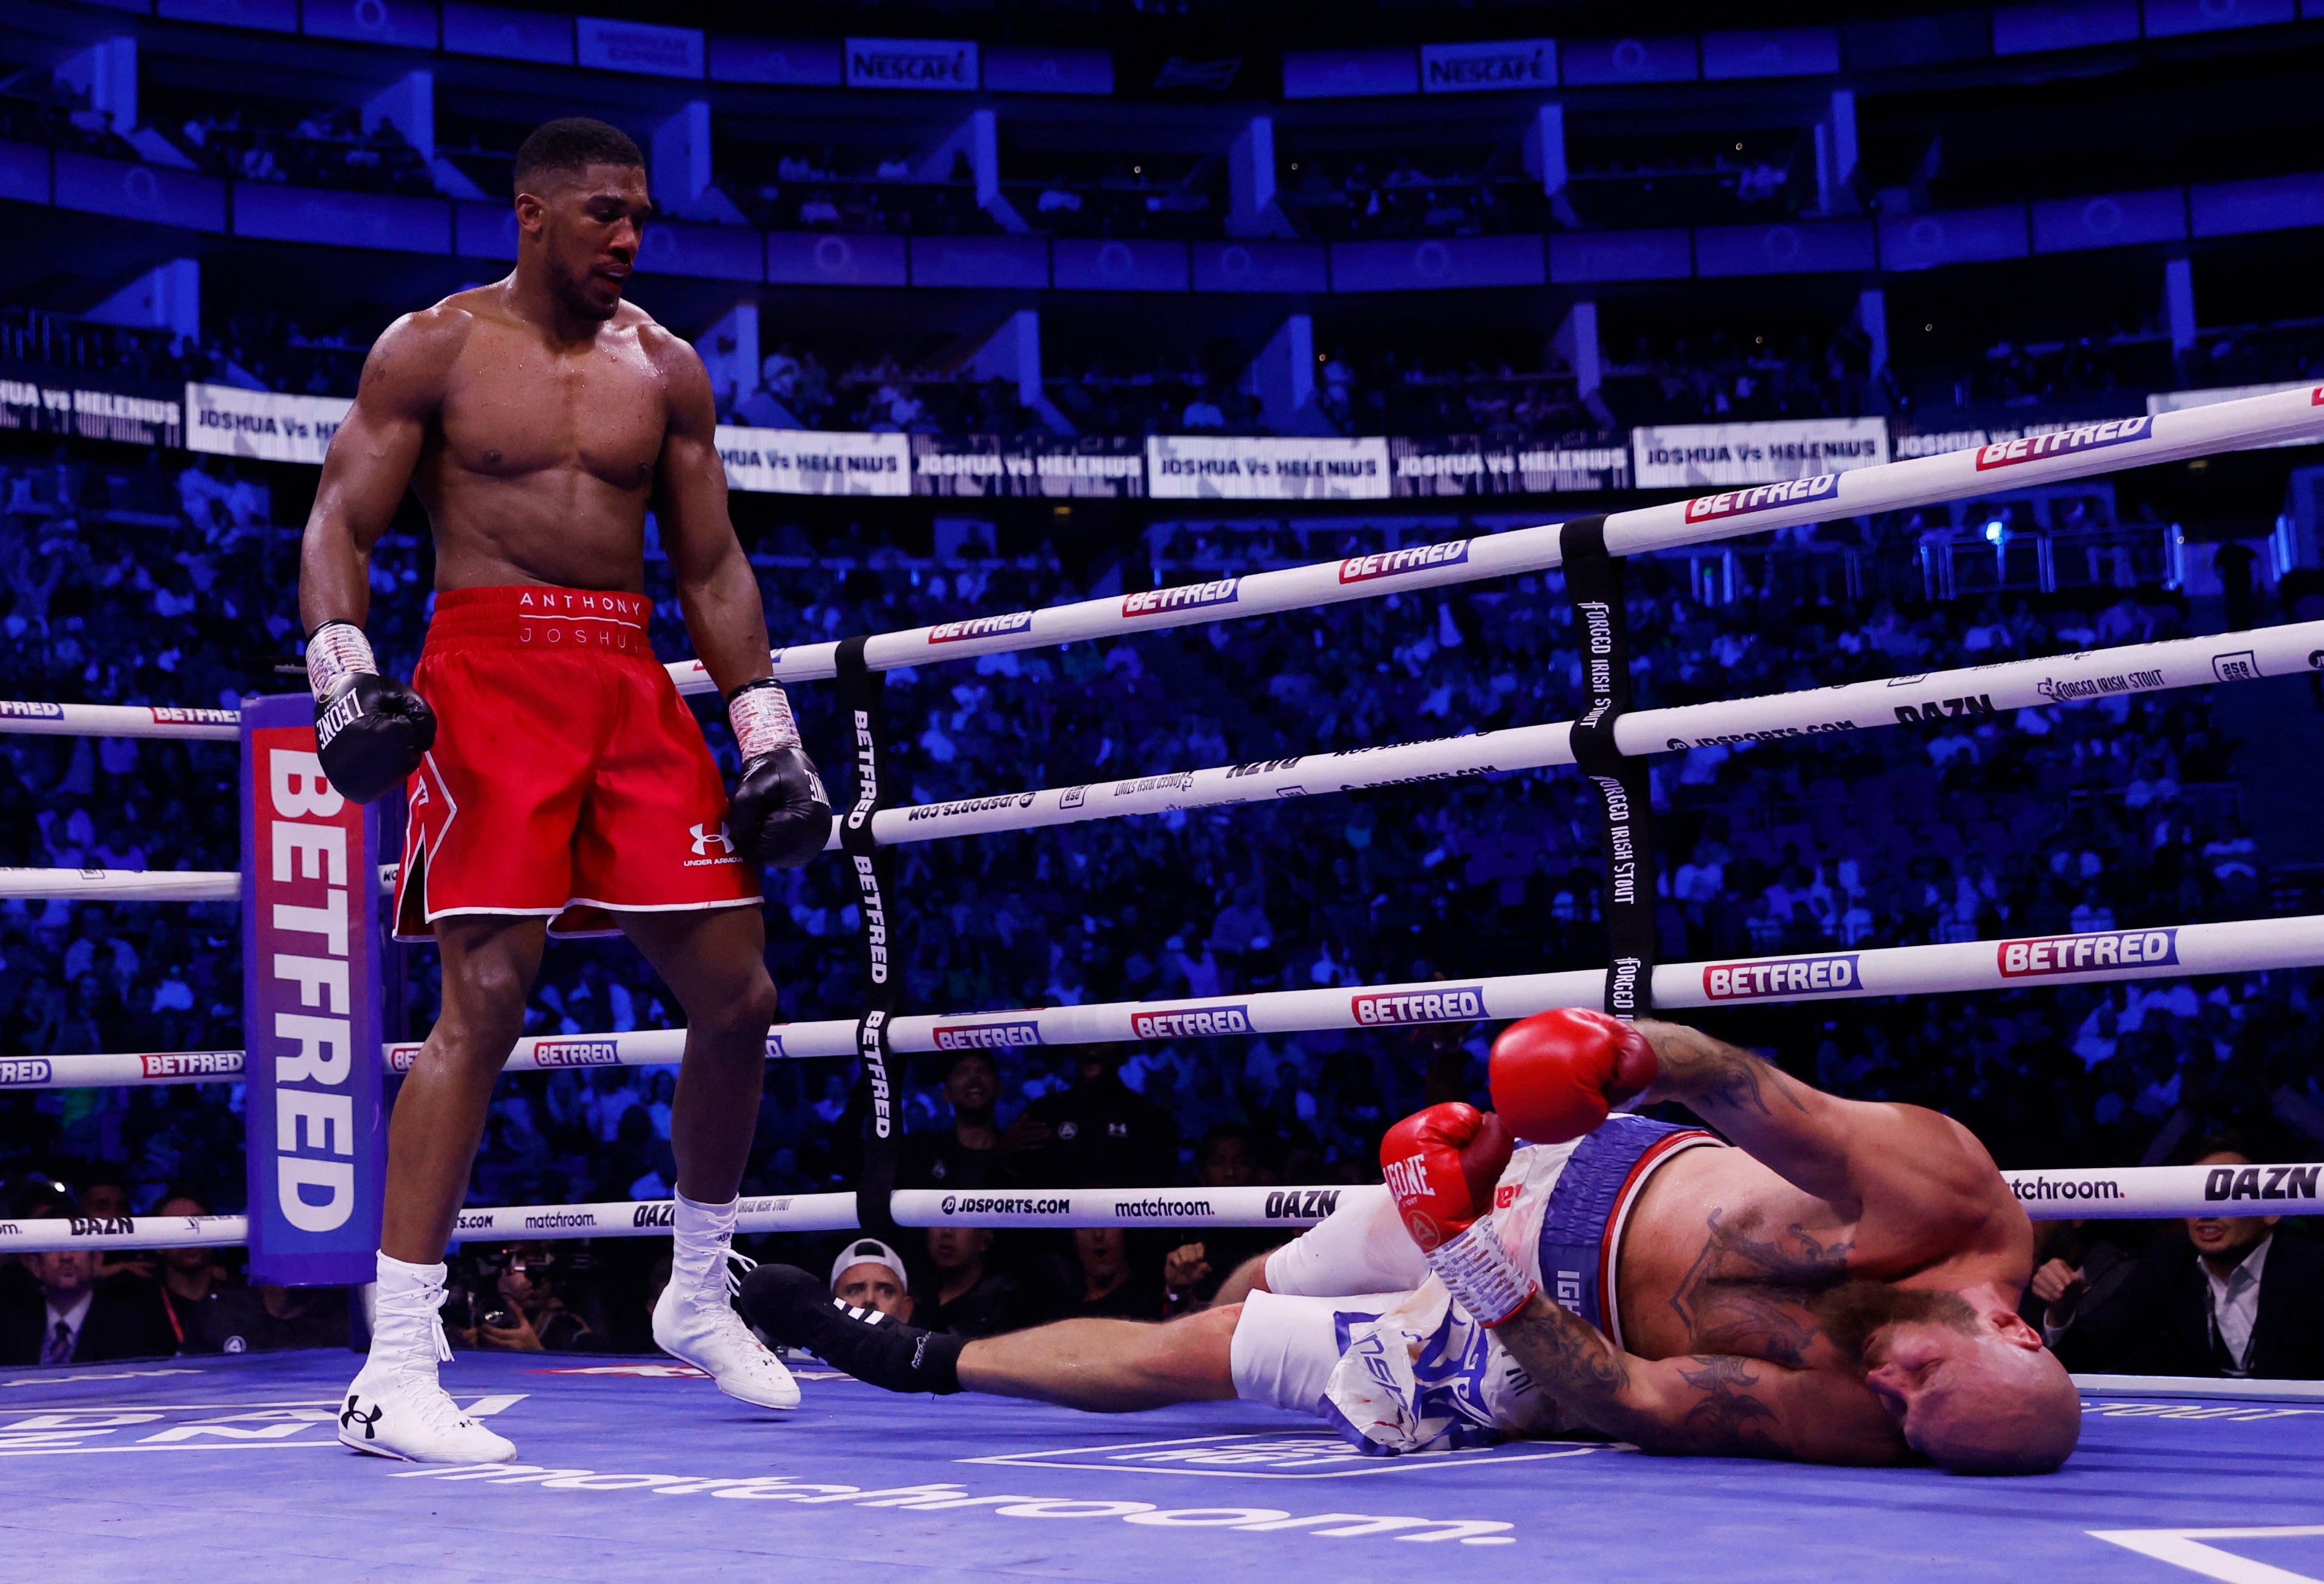 Joshua knocked Helenius out cold in the seventh round